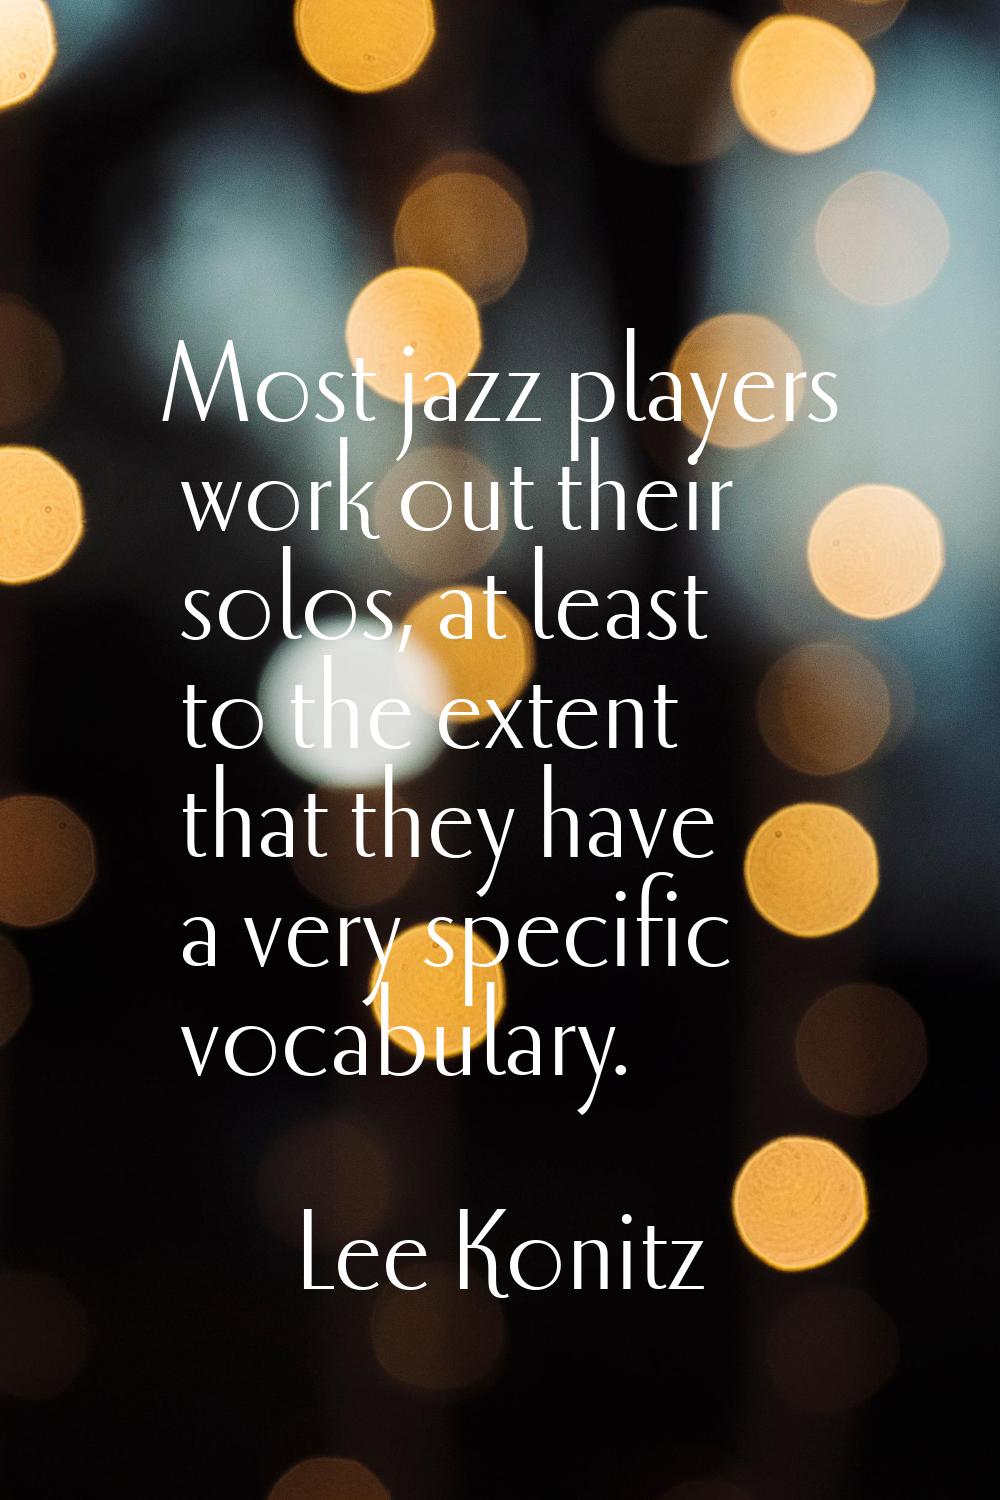 Most jazz players work out their solos, at least to the extent that they have a very specific vocab